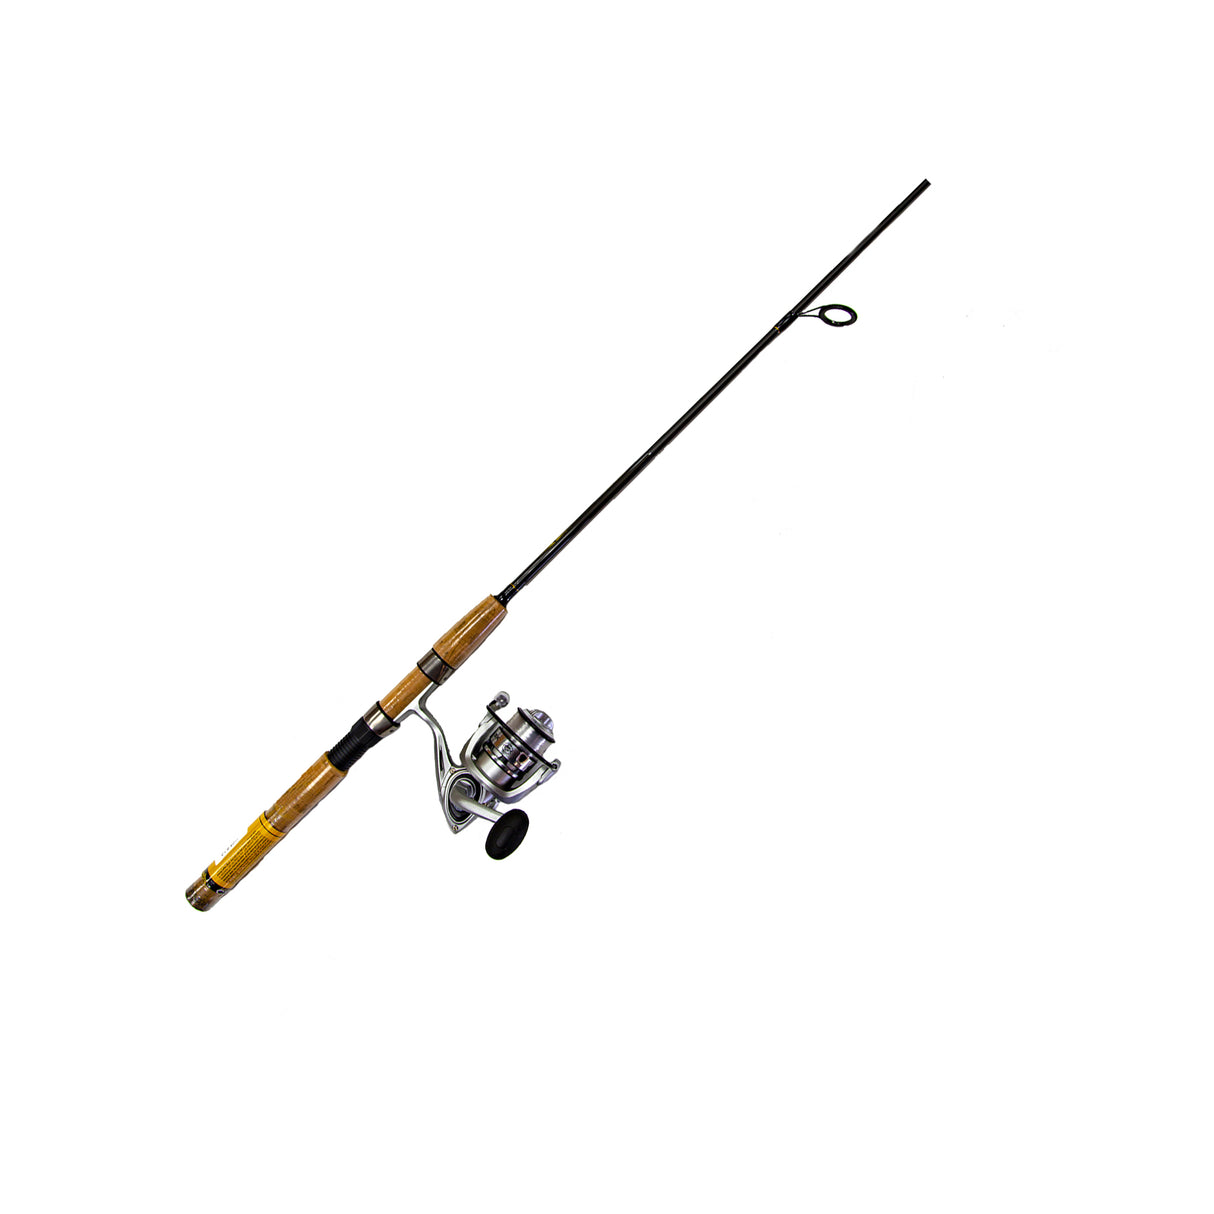 CAPE COD CLASSIC FRESHWATER 6' LIGHT SPINNING COMBO